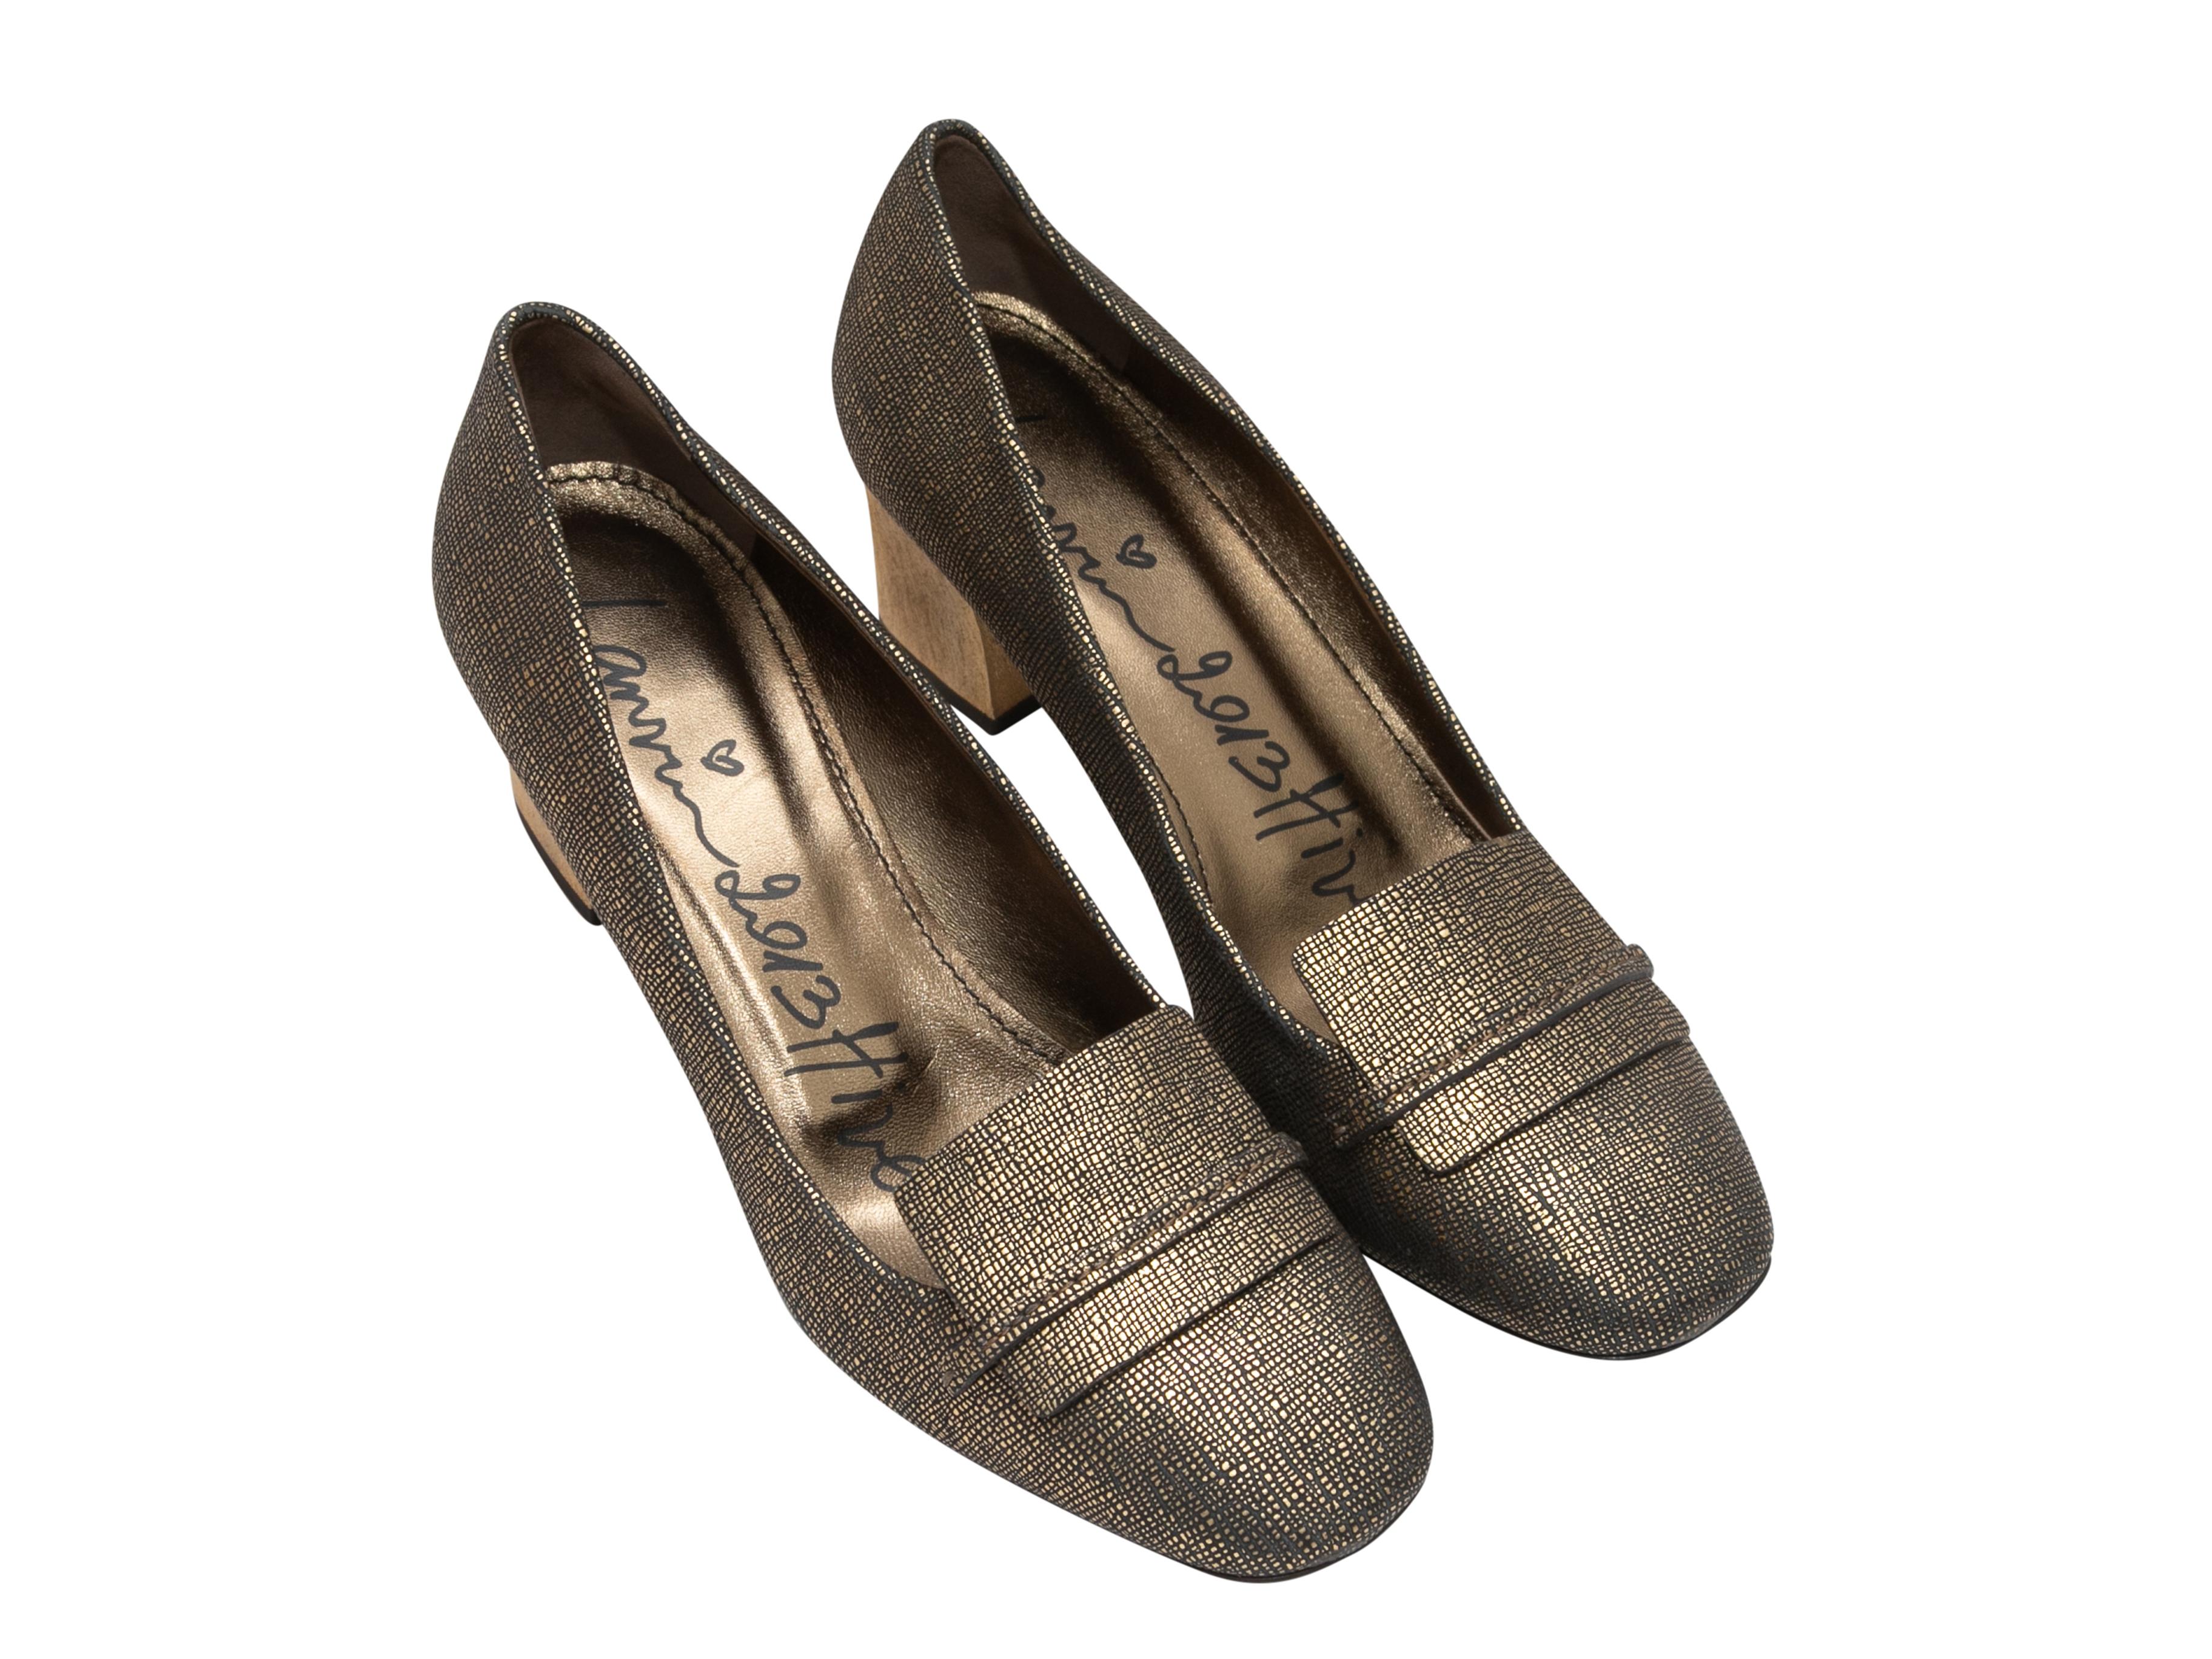 Gold and black leather pumps by Lanvin. From the Winter 2013 Collection. 

Designer Size: 39.5
US Recommended Size: 9.5 